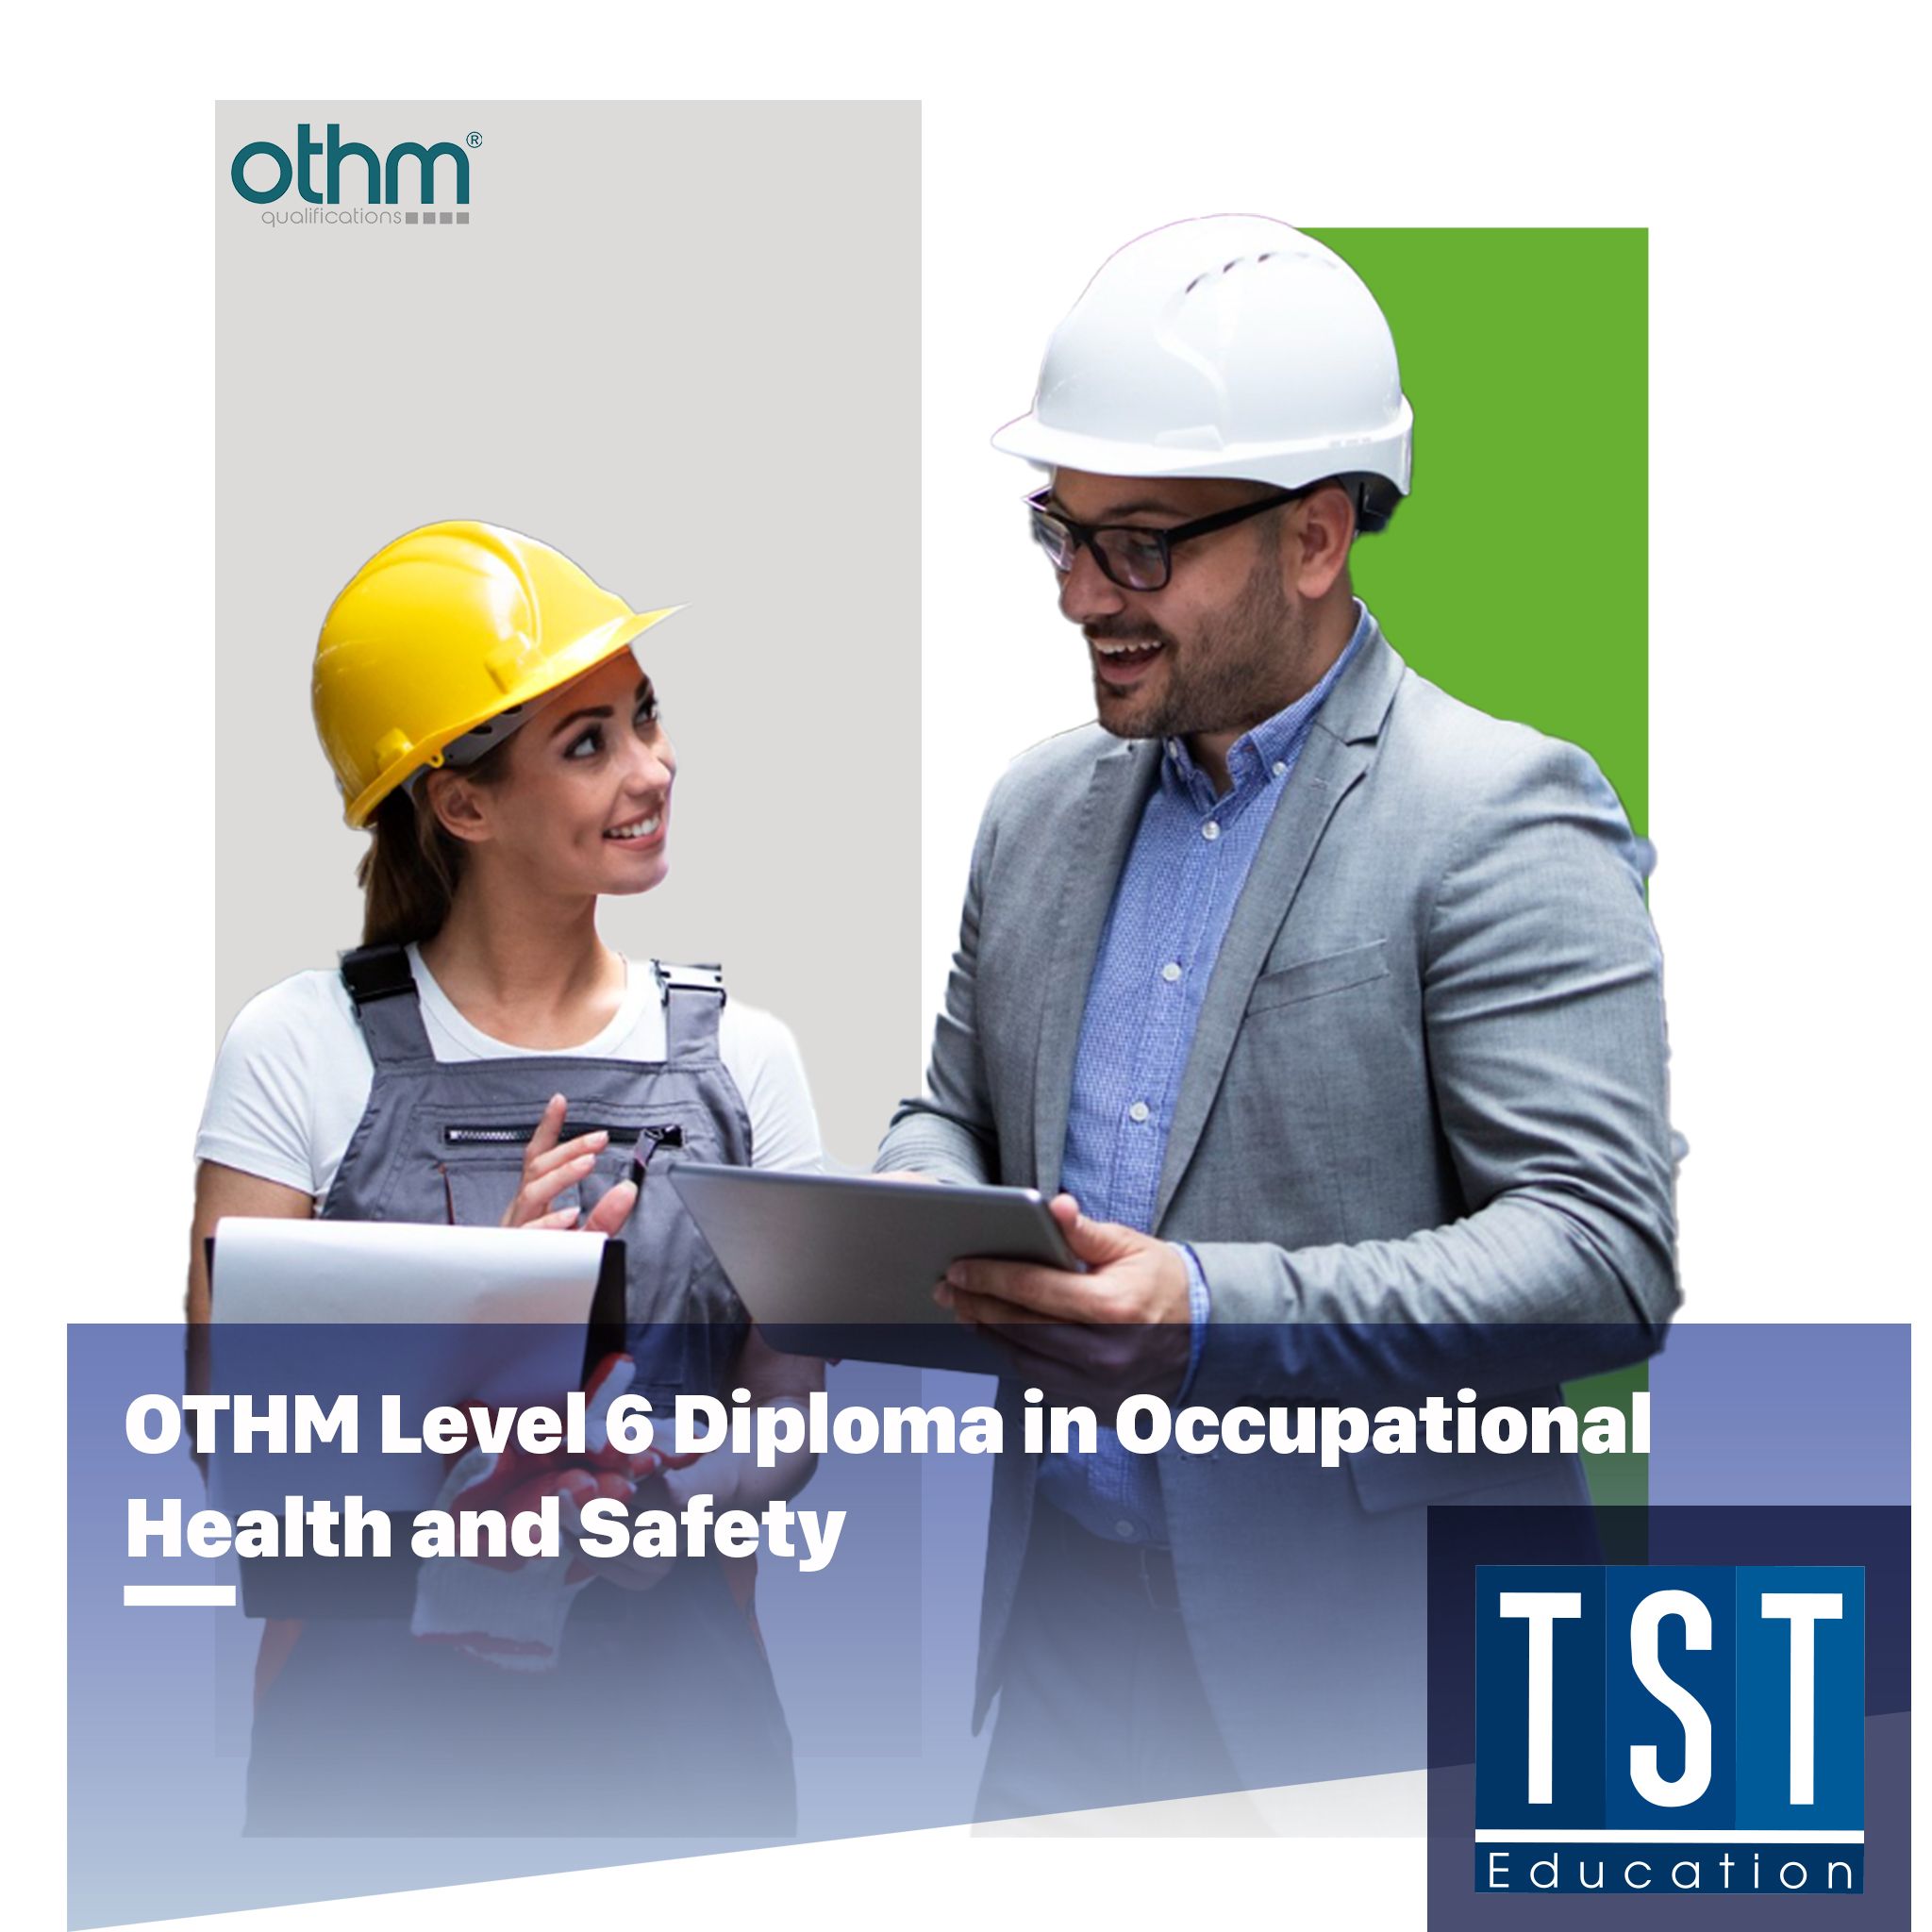  OTHM Level 6 Diploma in Occupational Health and Safety 